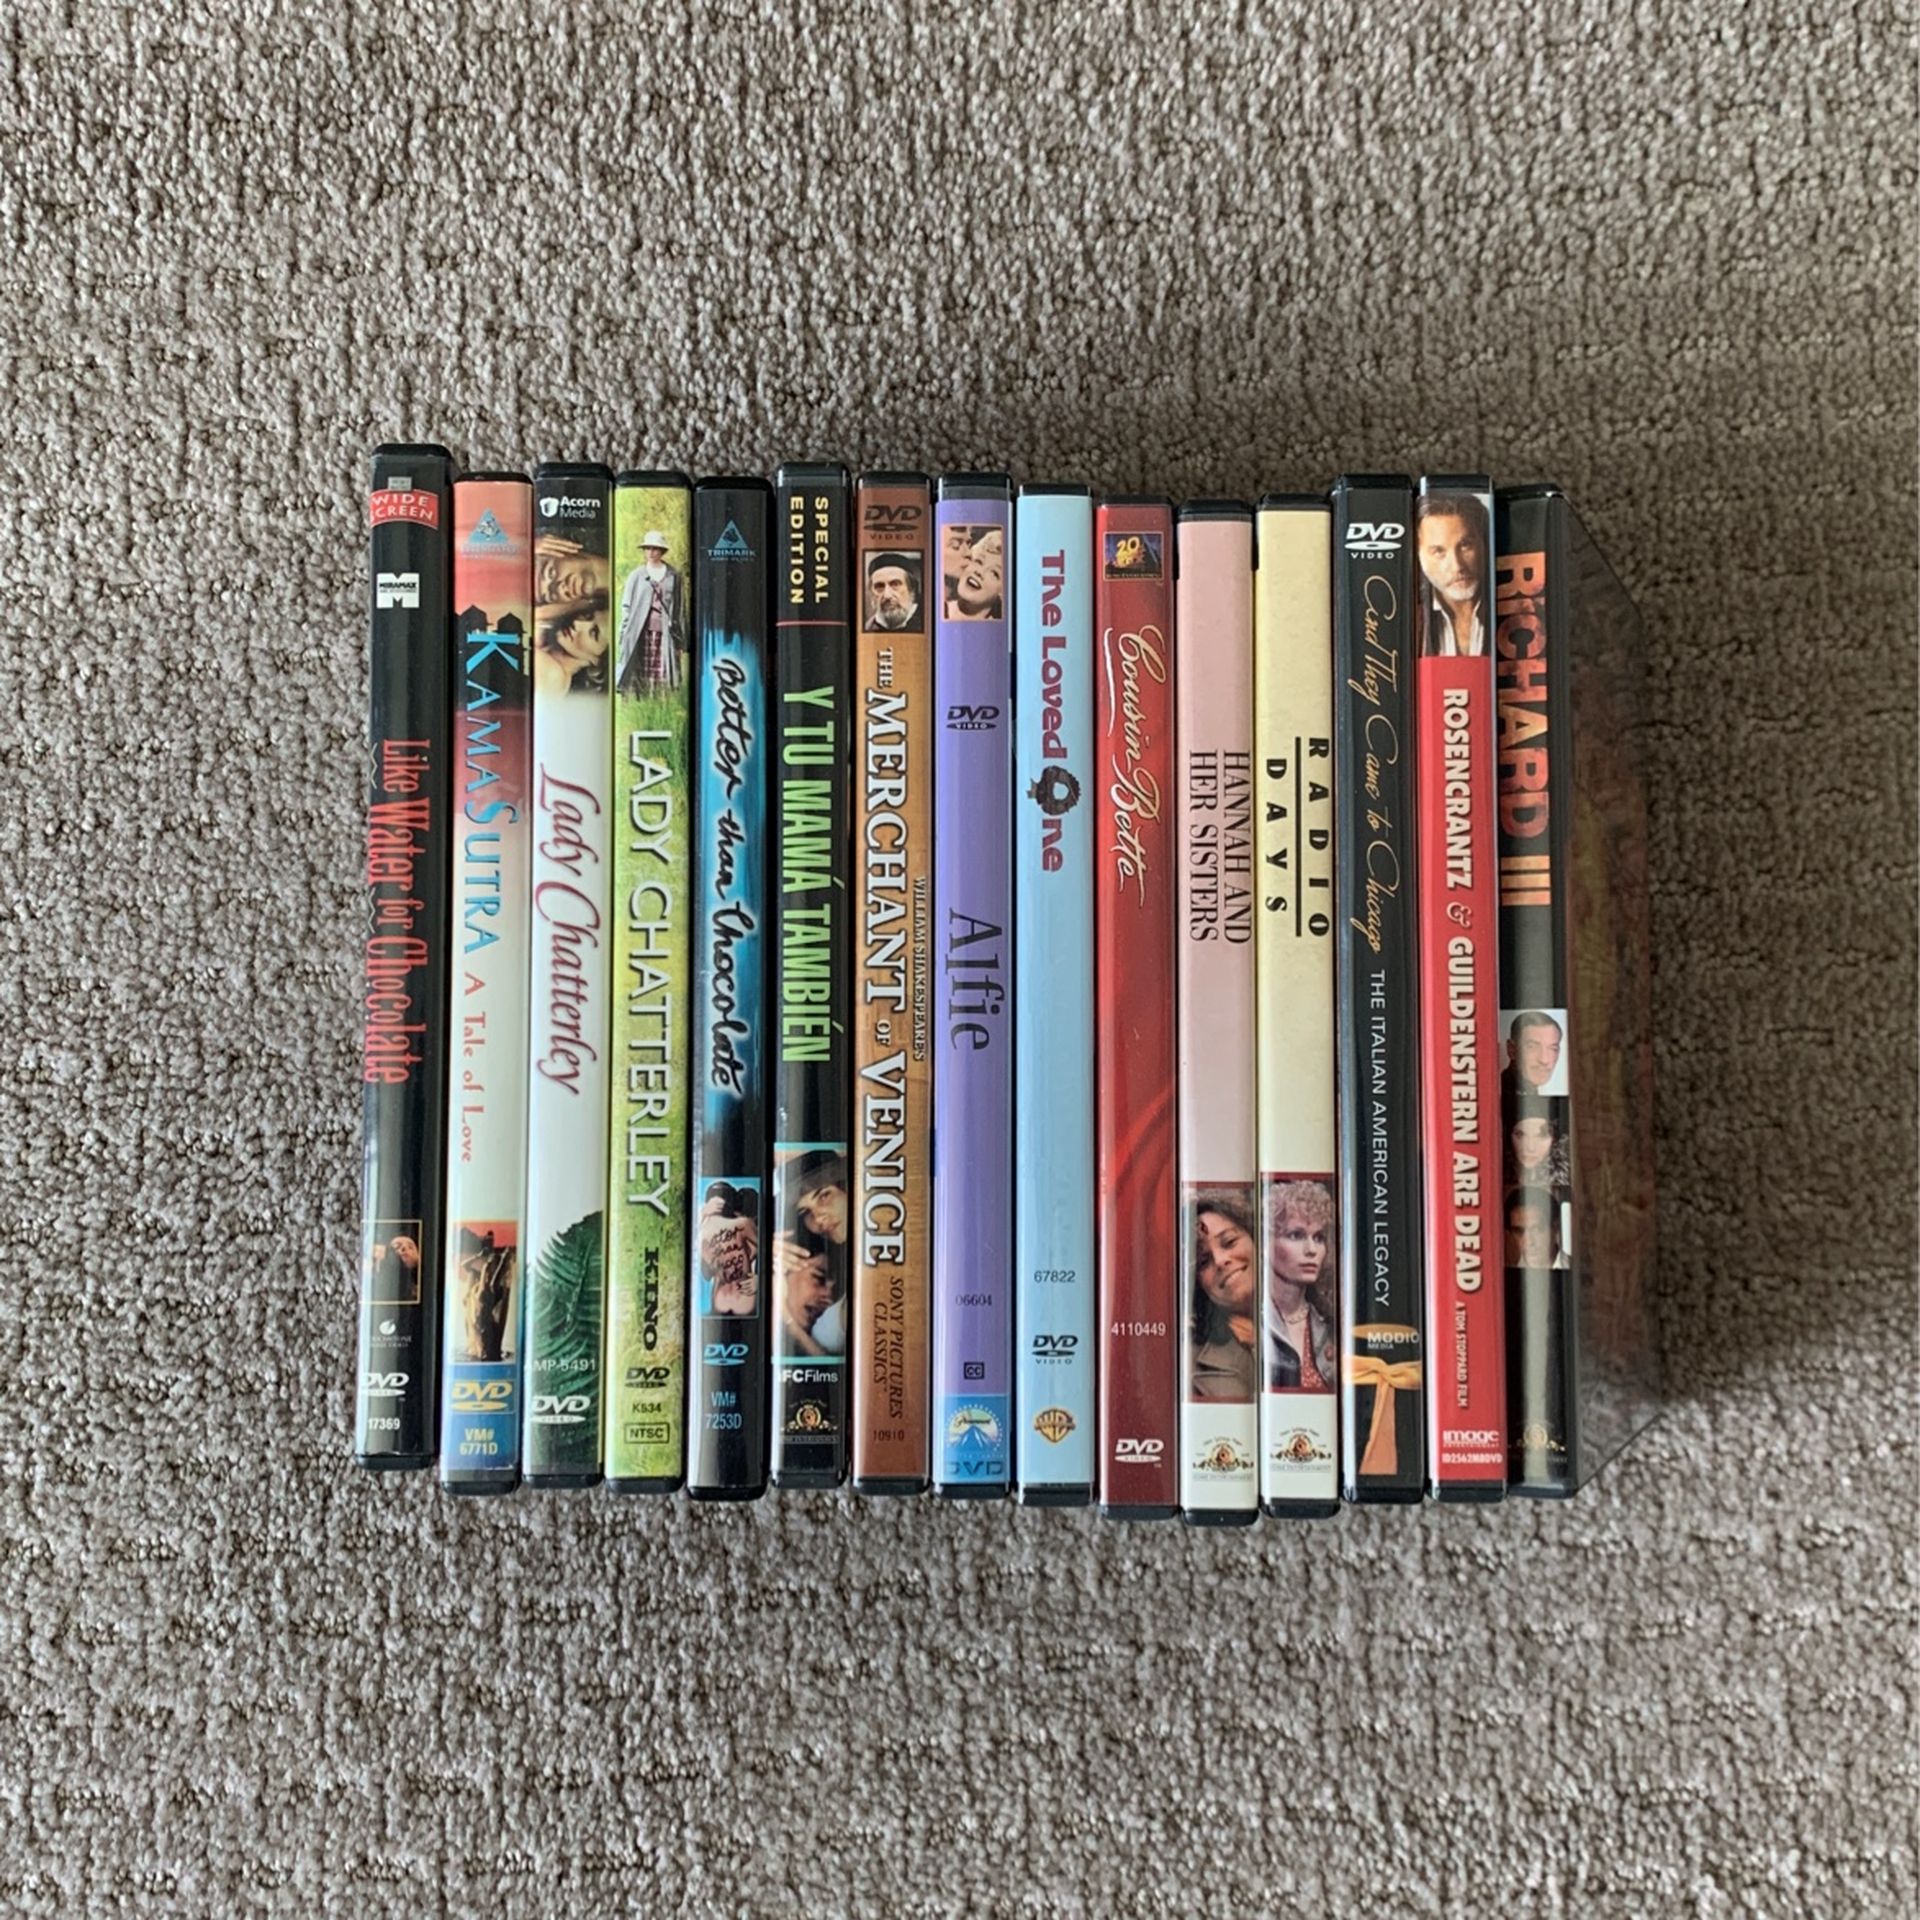 15 DVDs: Large Variety - all sorts of Ratings